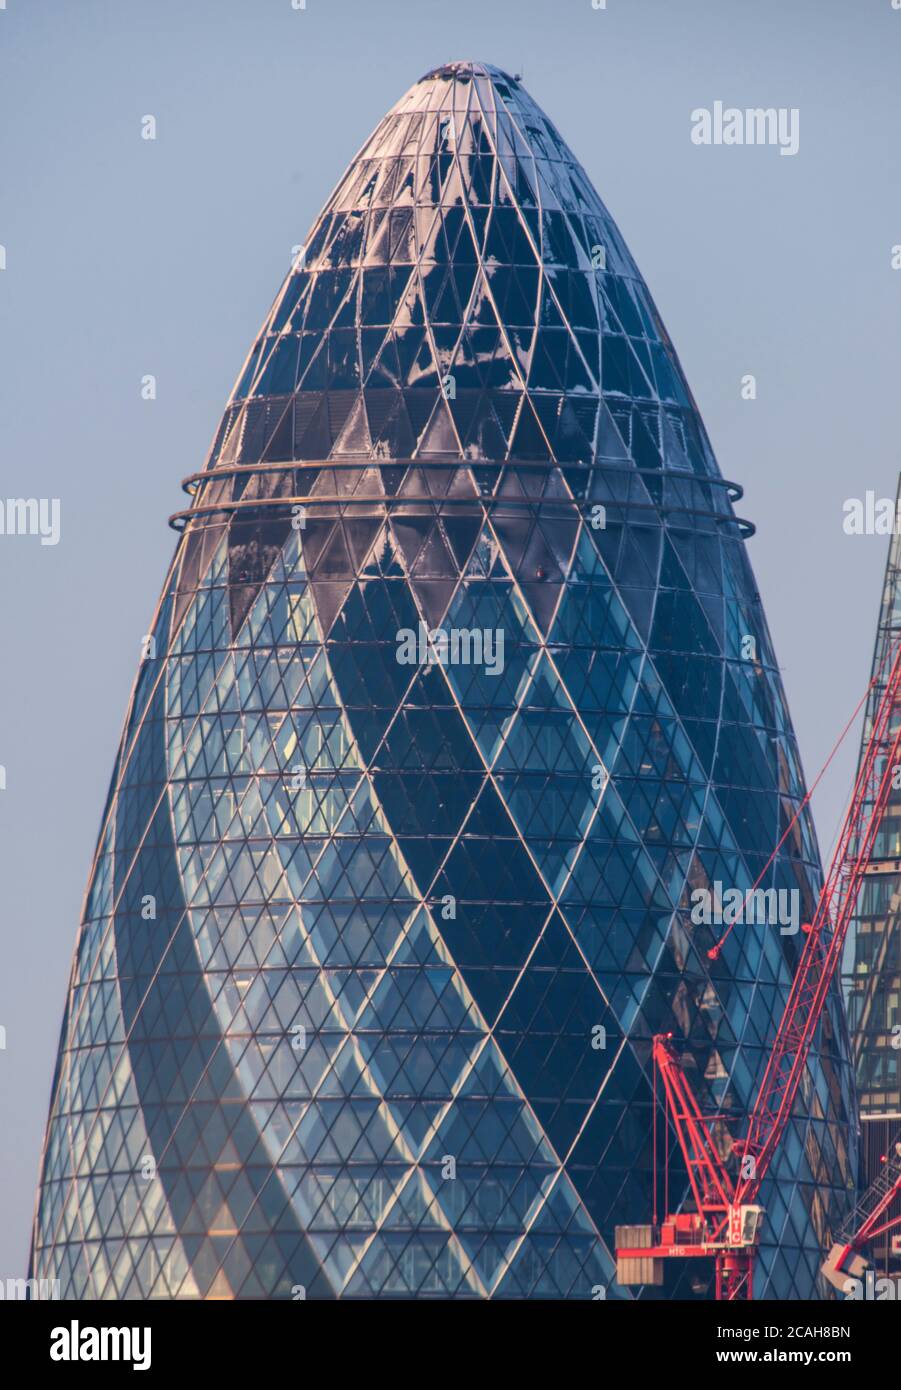 Top of the Gherkin capped with snow. 30 St Mary Axe, London, United Kingdom. Architect: Foster + Partners, 2004. Stock Photo